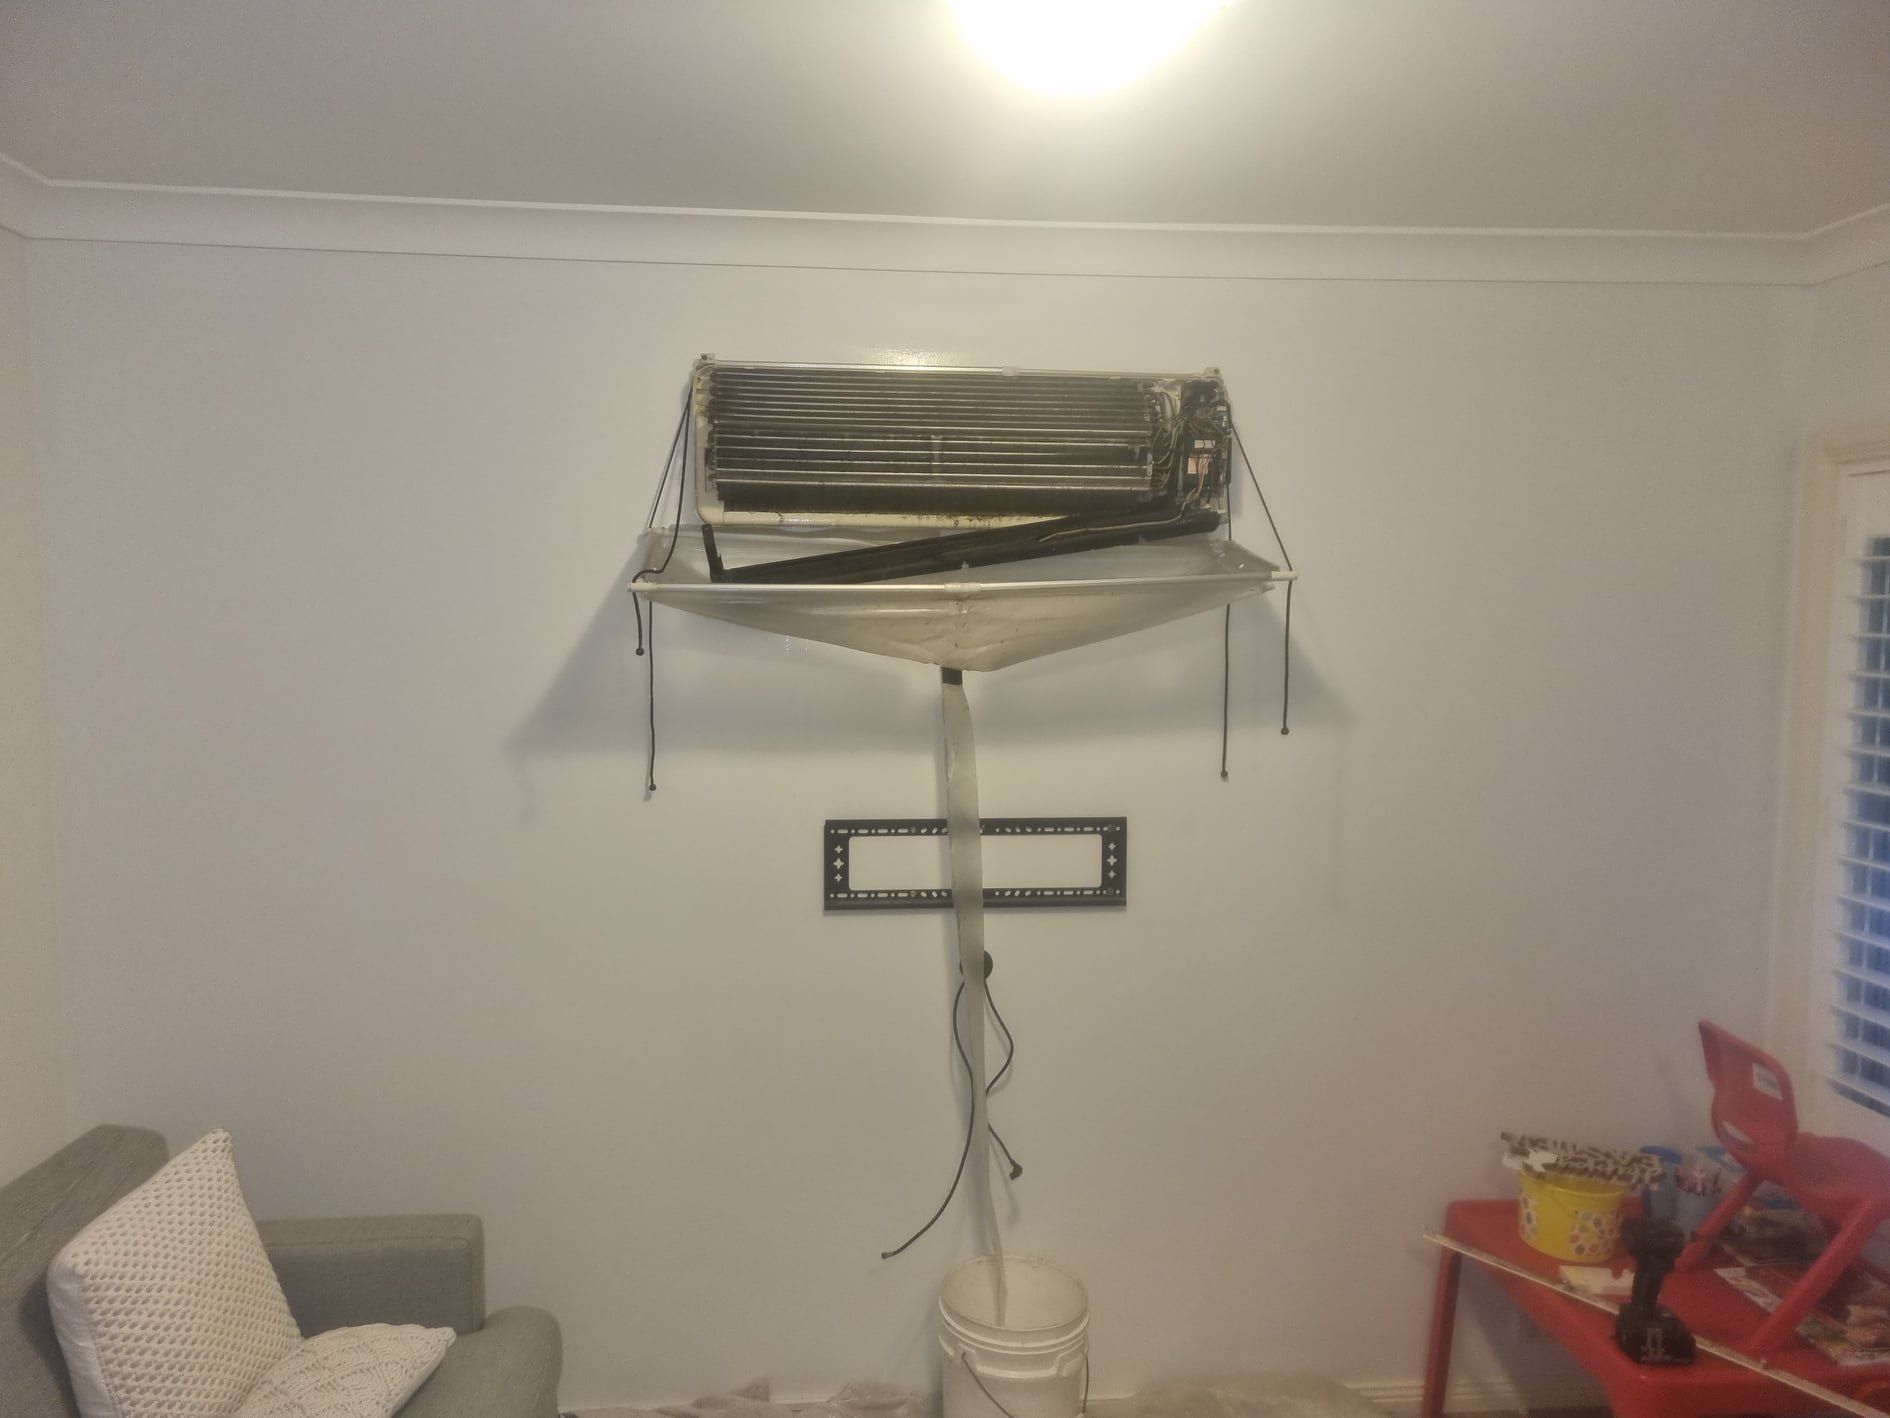 Mould Build Up In Air Conditioner — Air Conditioner Repairs in Illawarra, NSW